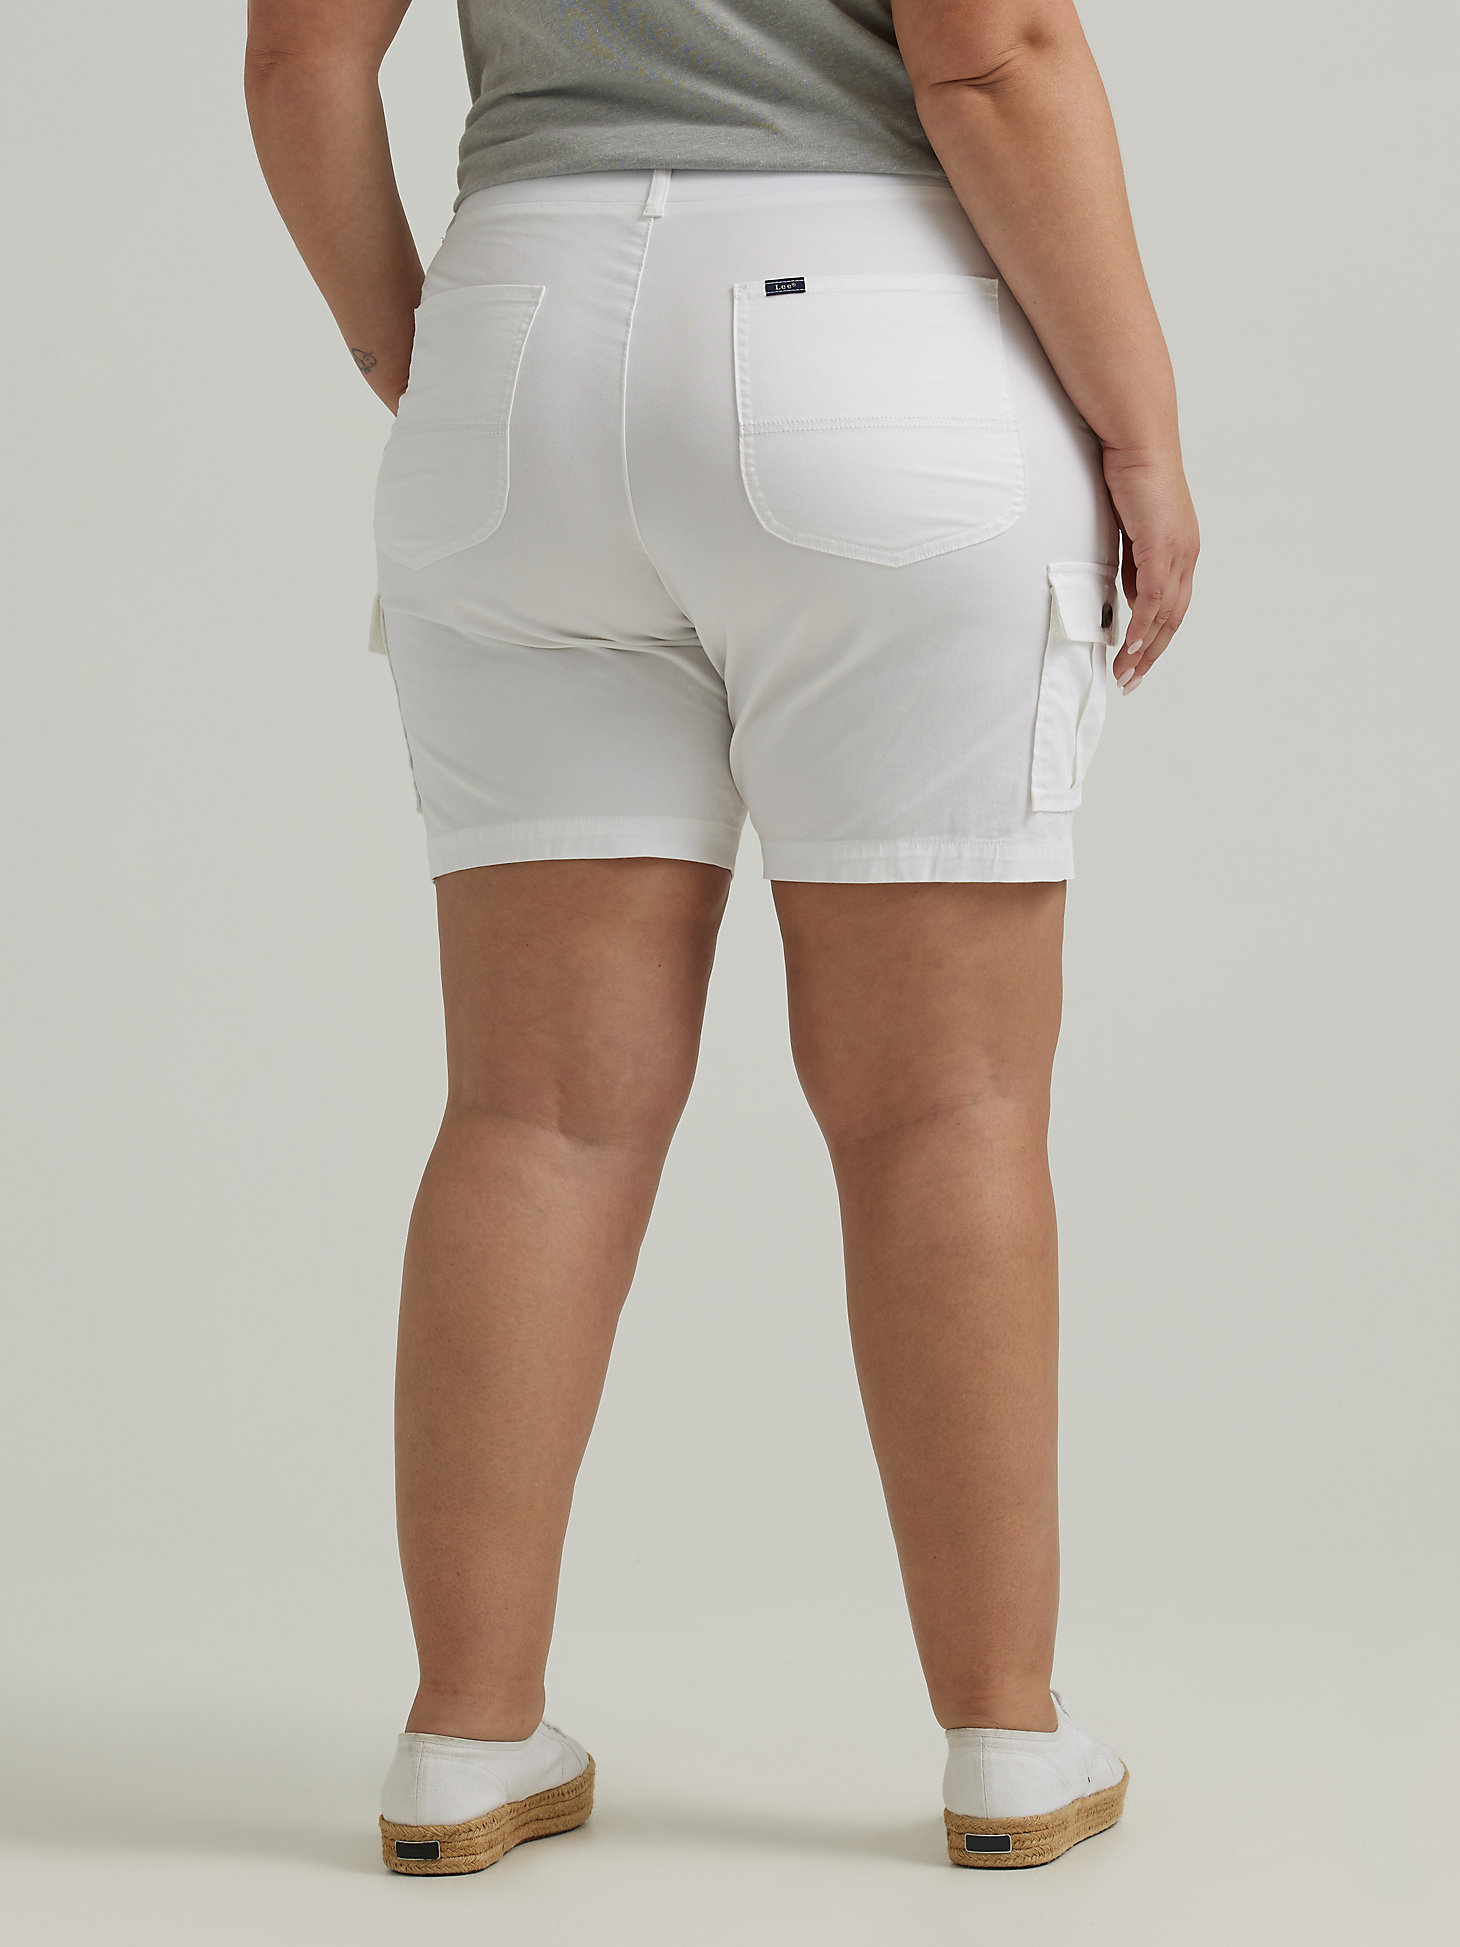 Women's Ultra Lux with Flex-to-Go Relaxed Cargo Bermuda (Plus) in White alternative view 1